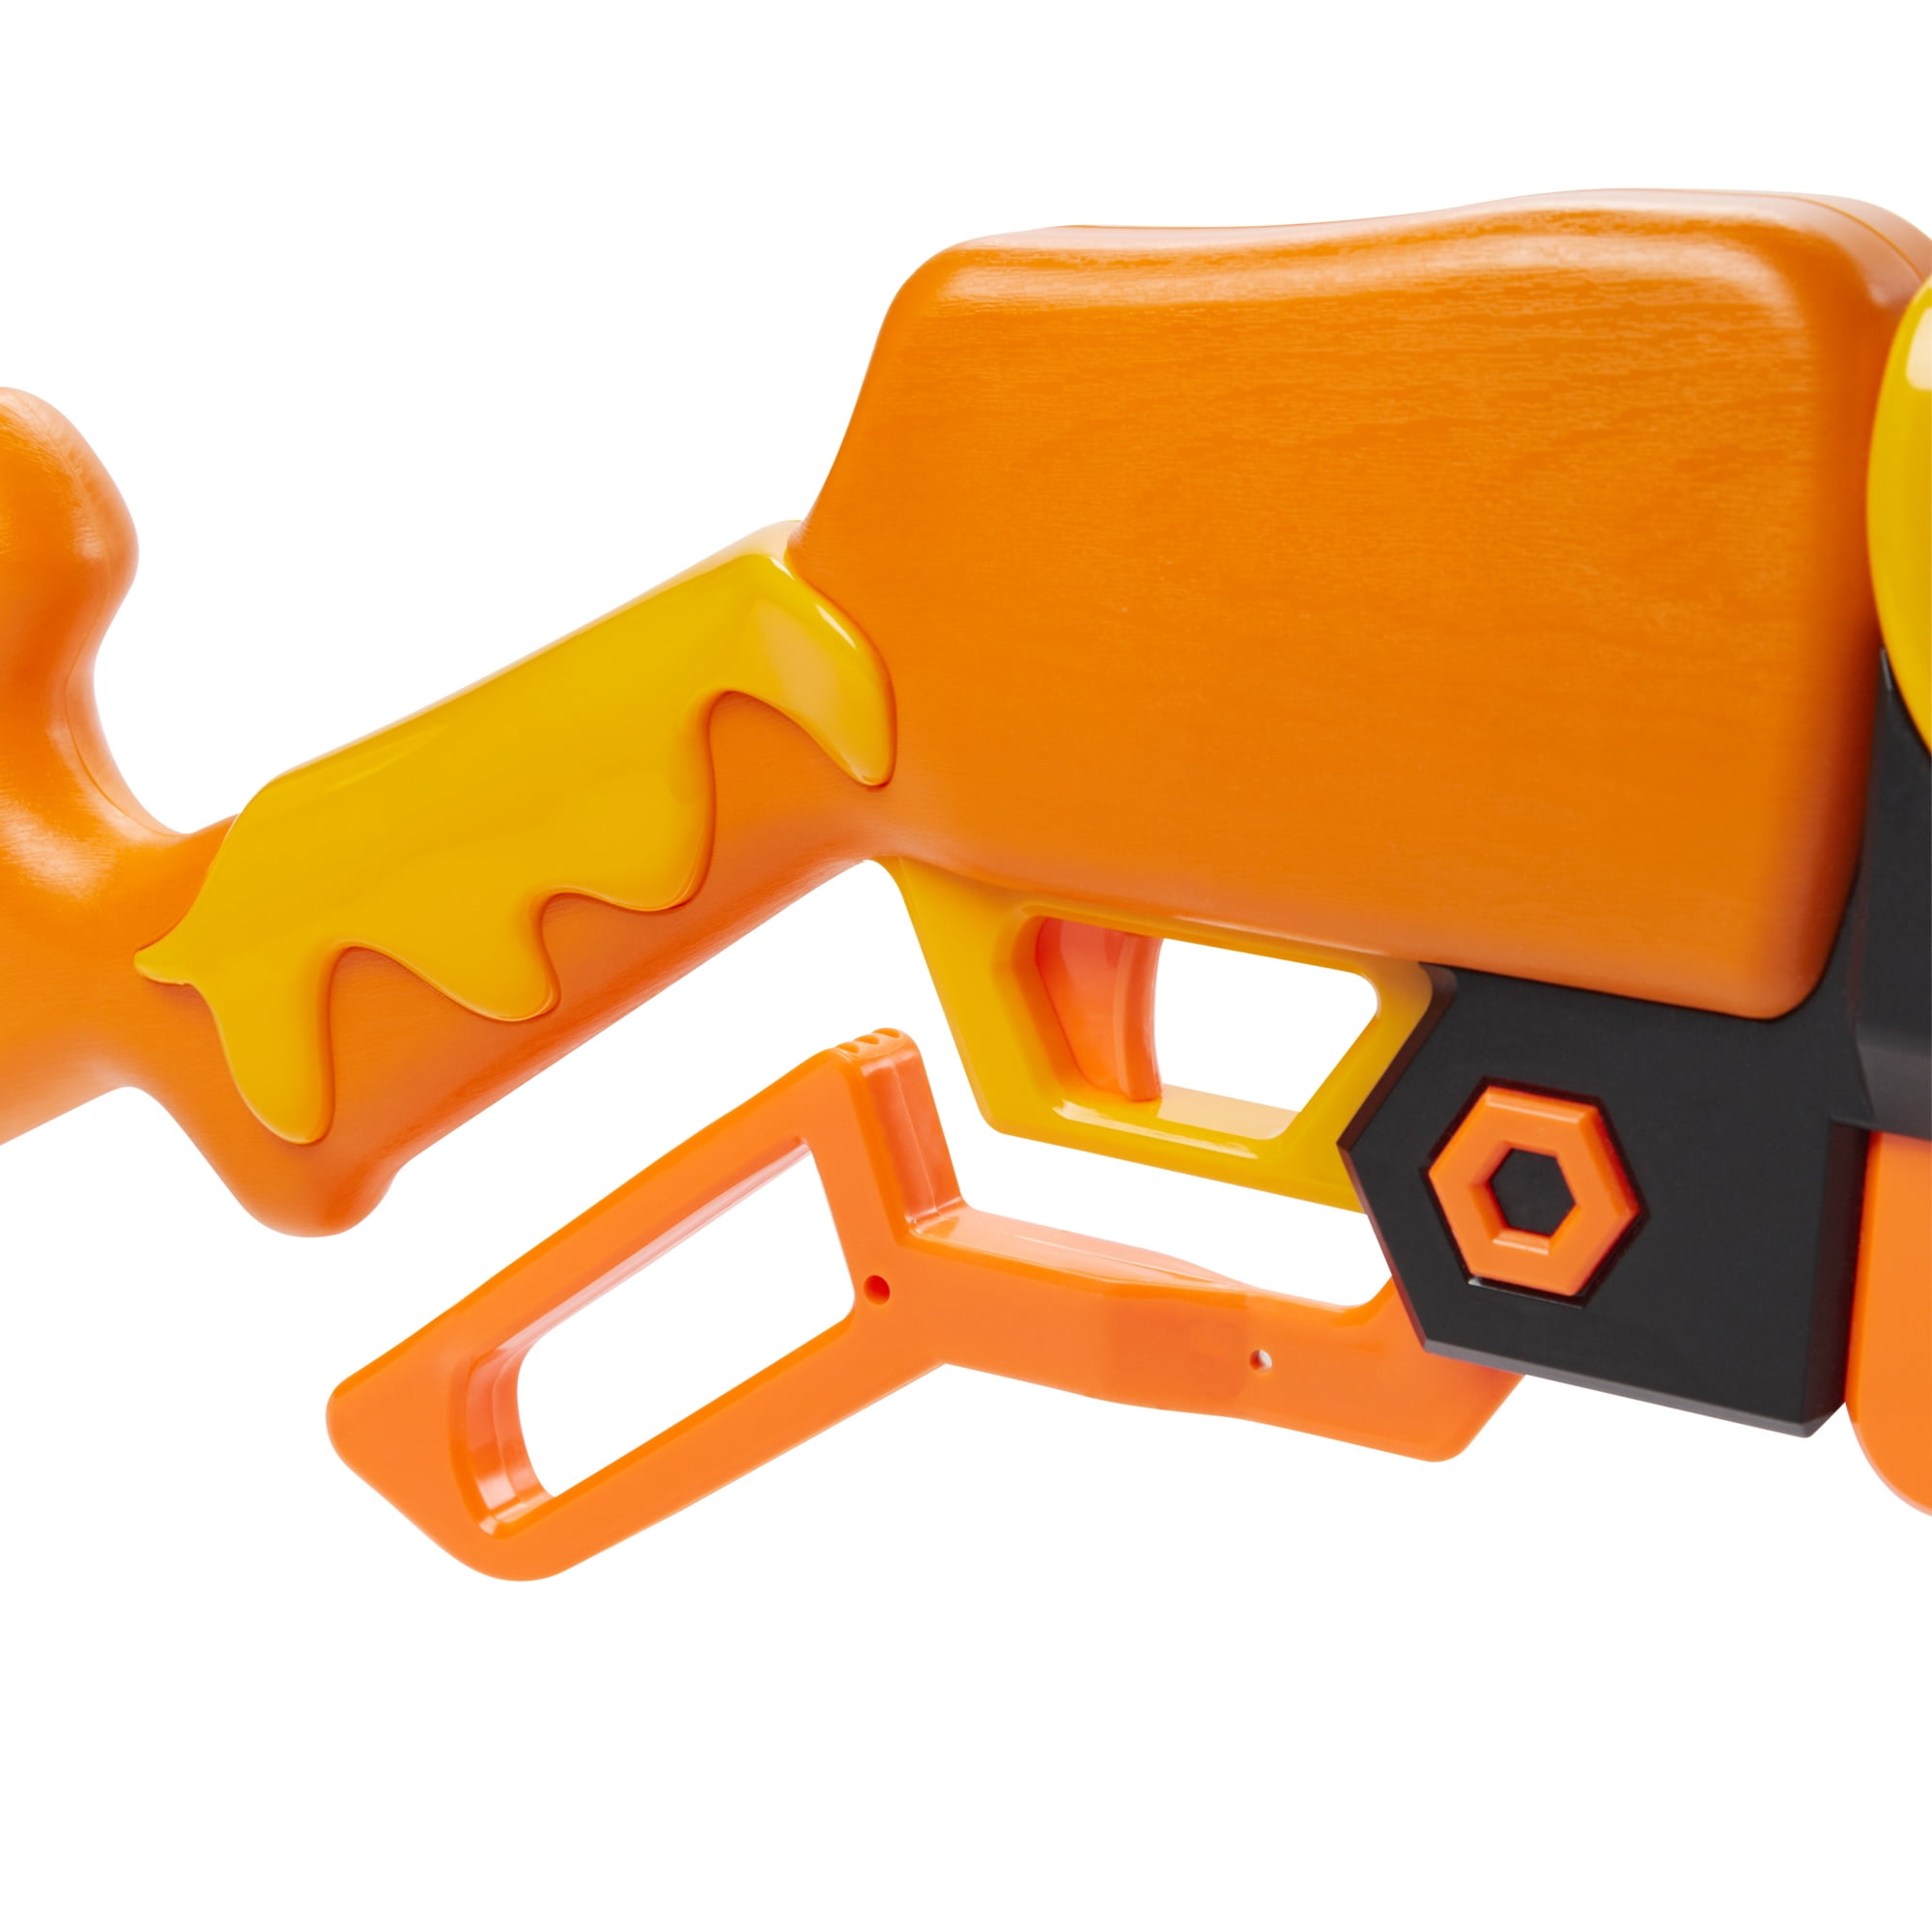 Nerf Roblox Adopt Me Bees - Toys Clearance